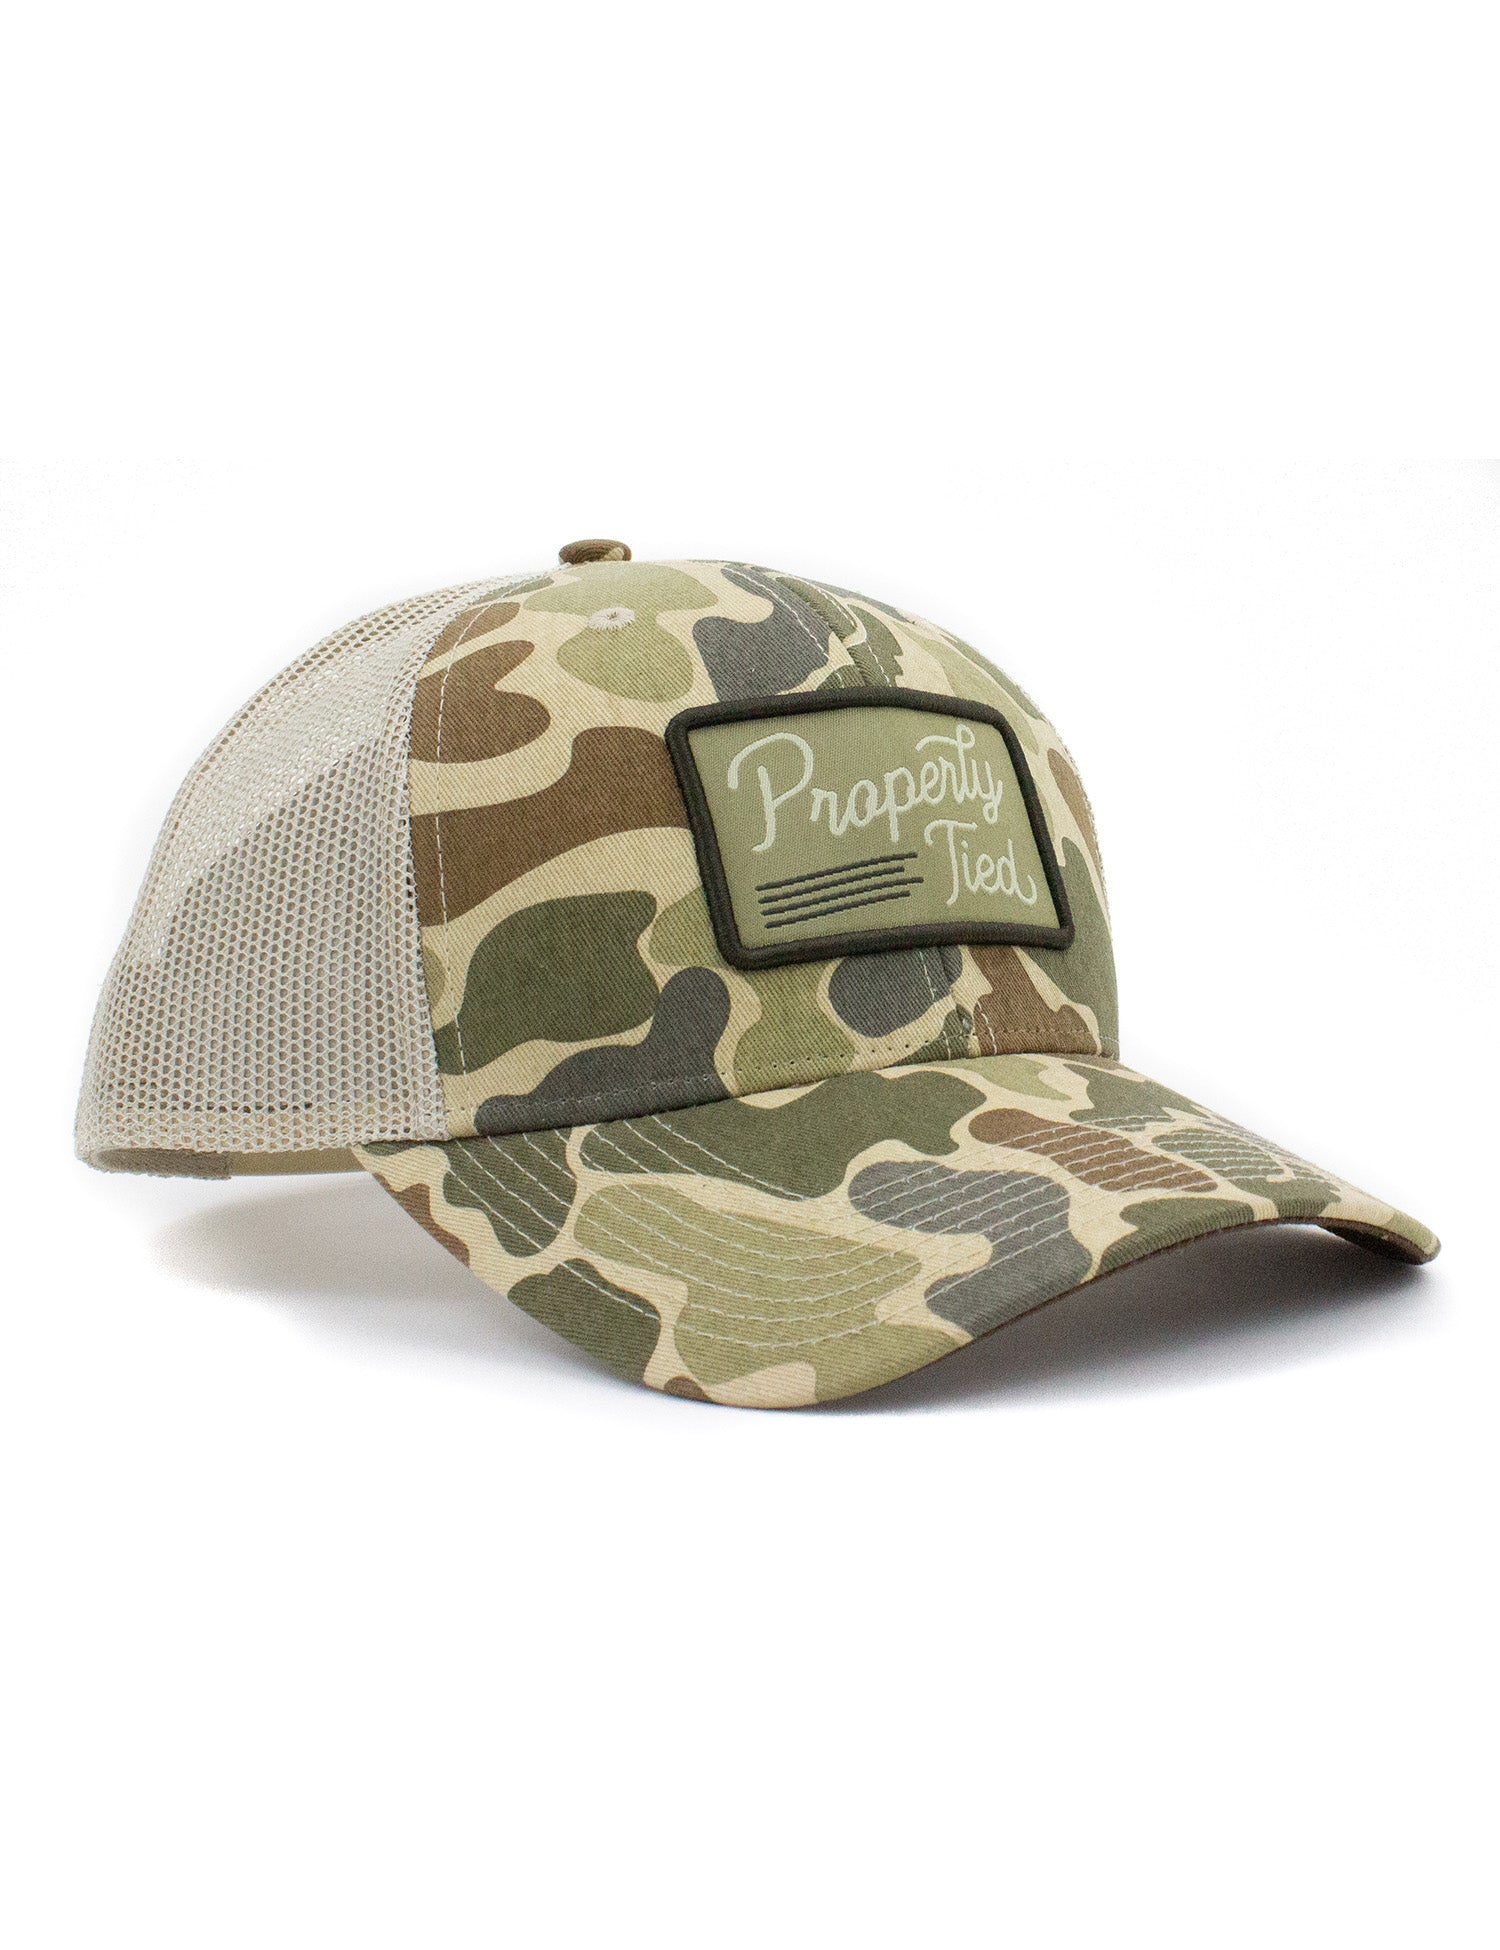 Properly Tied Vintage Camo Hat